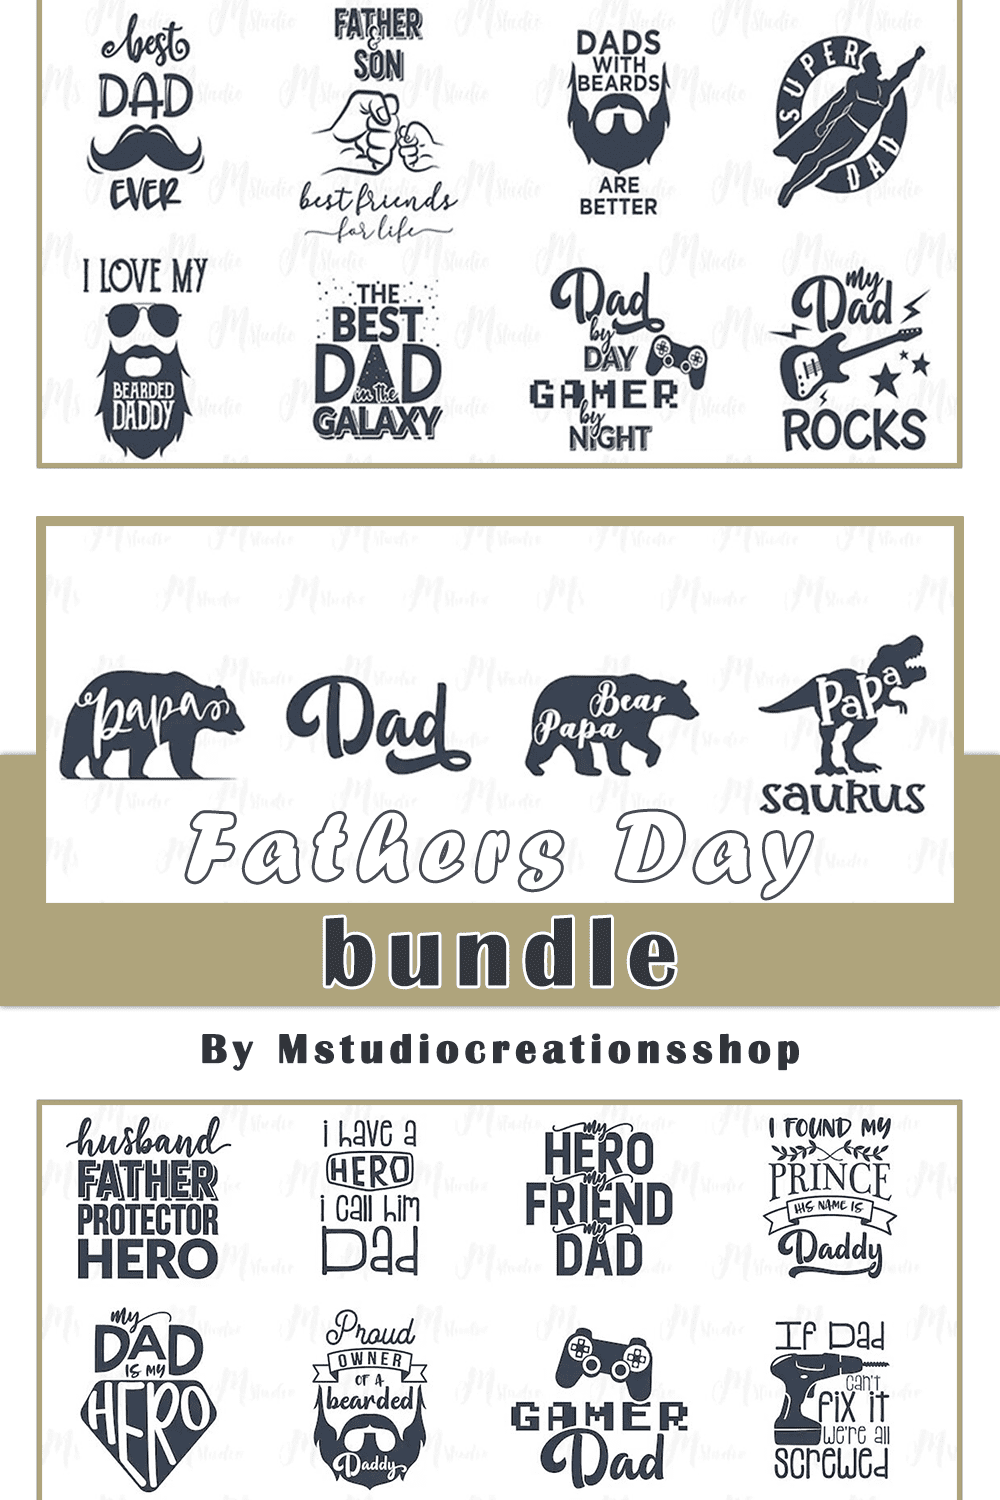 fathers day pinterest2 3